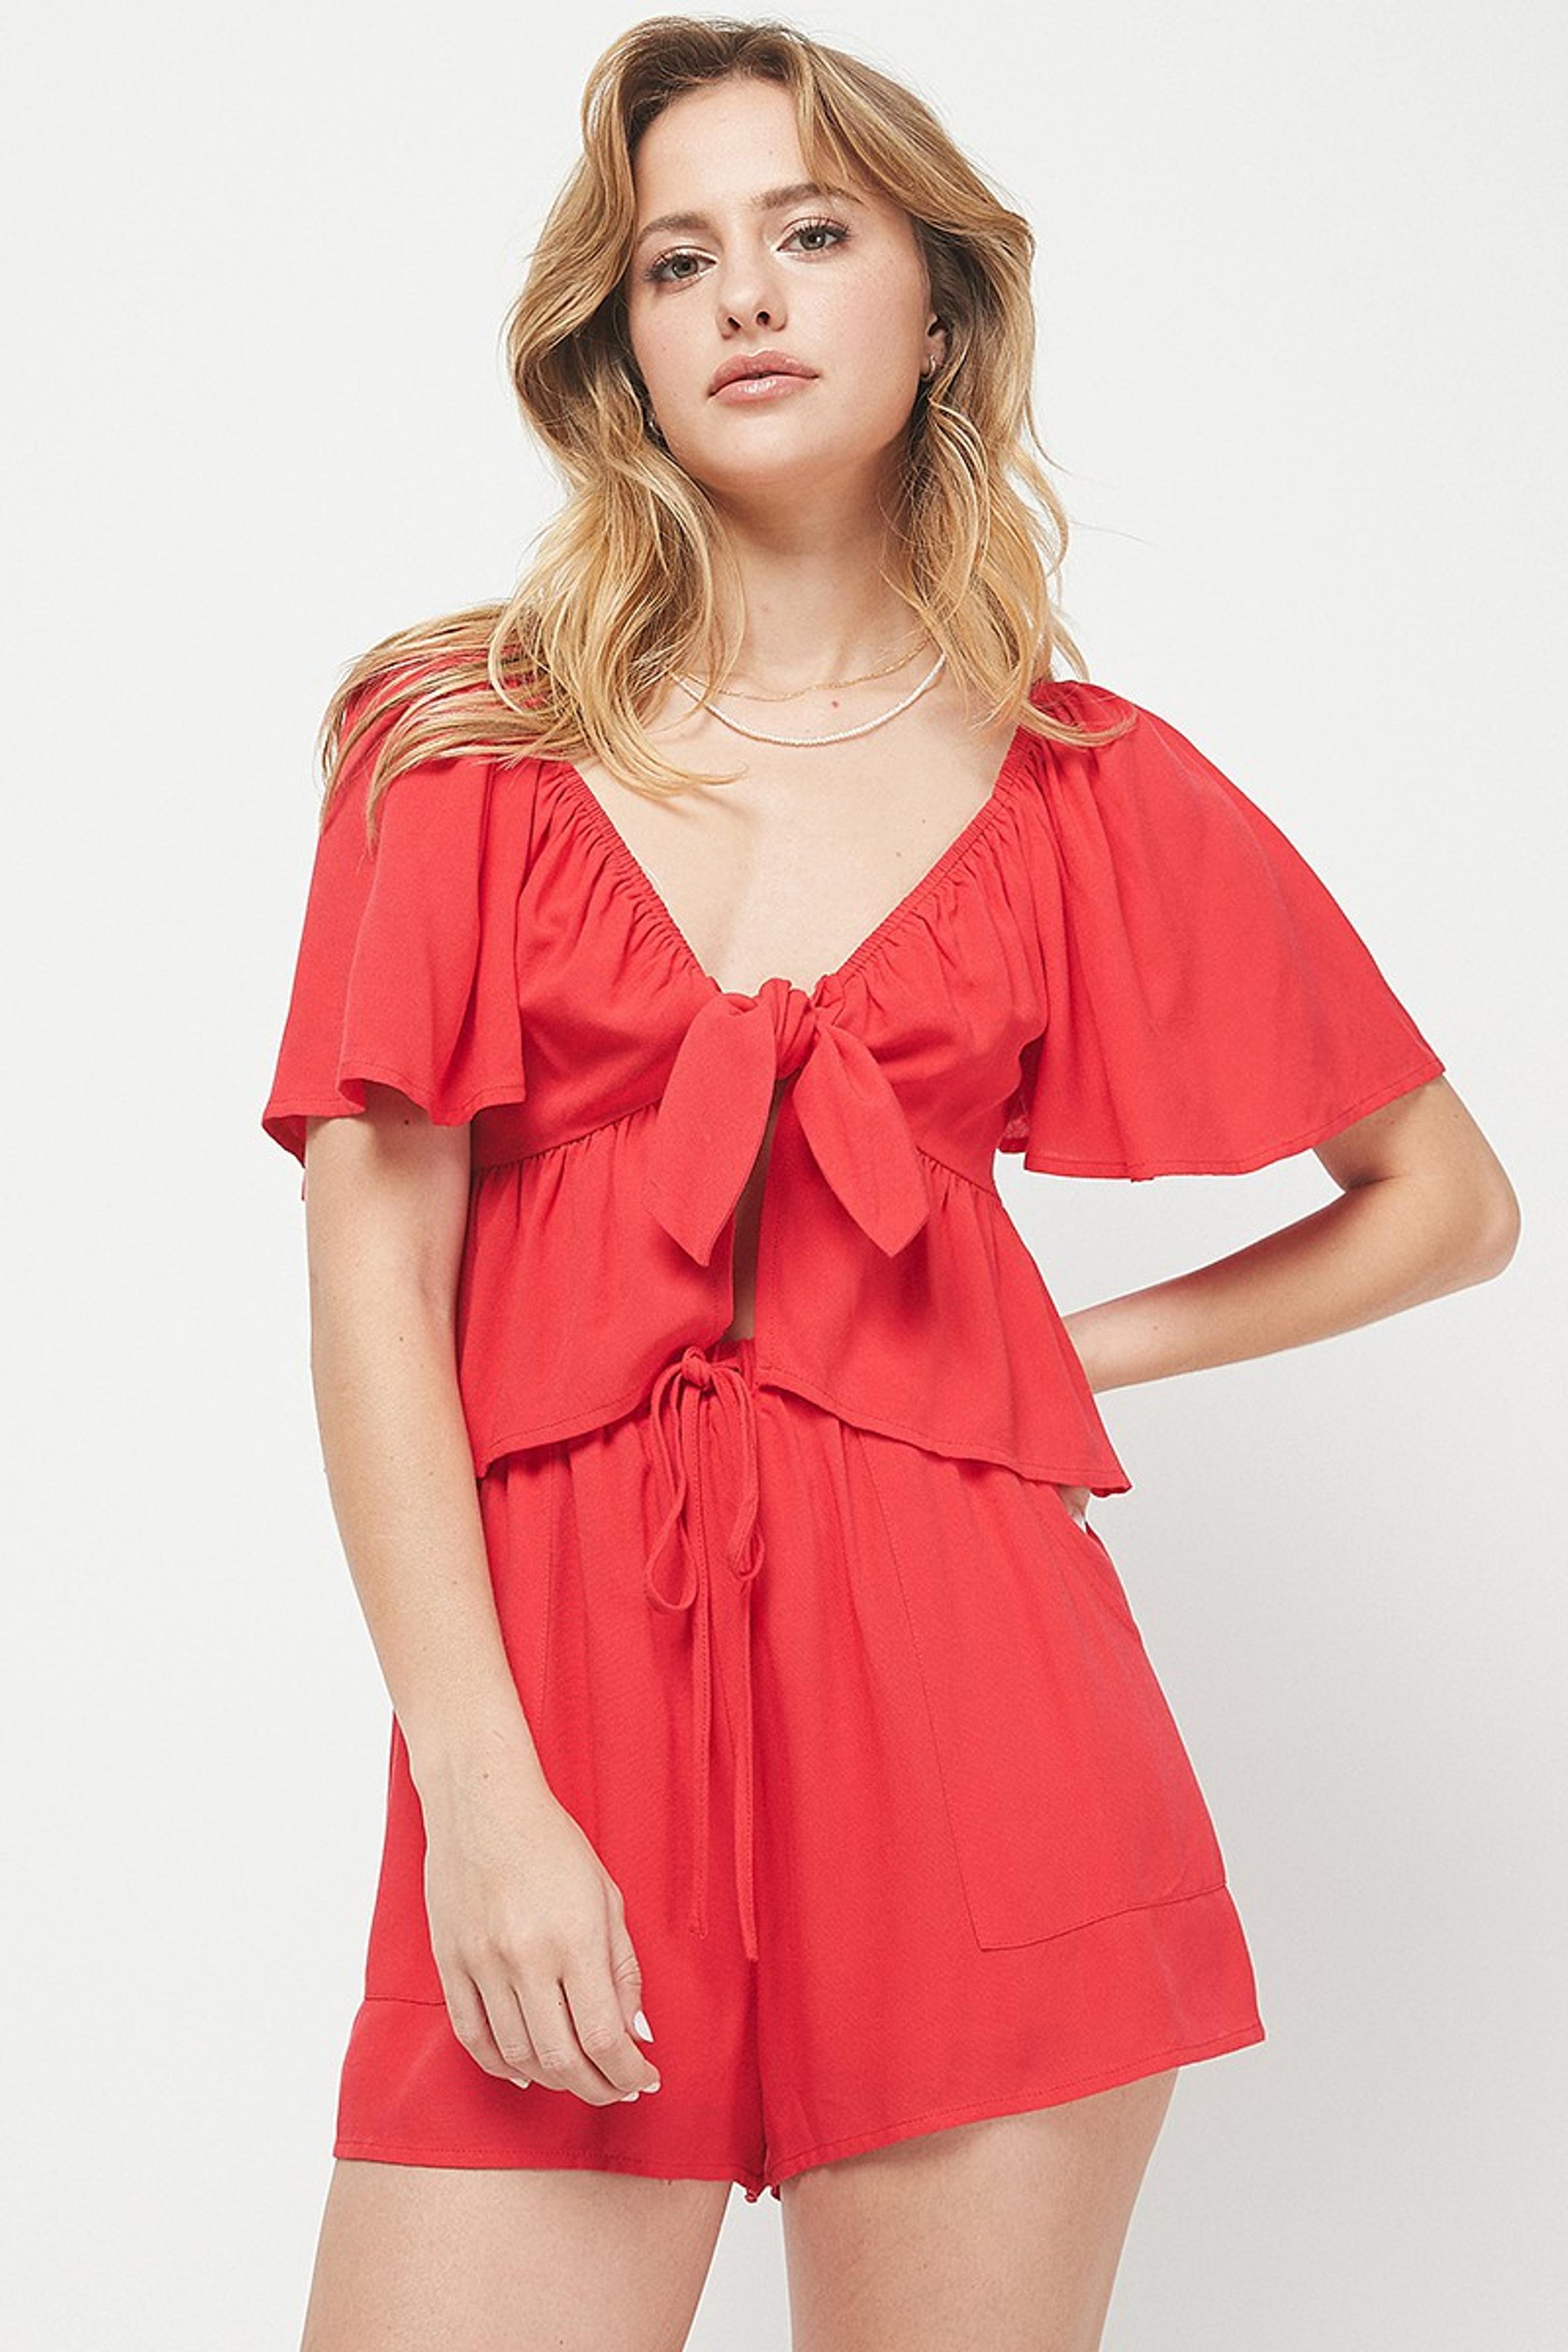  Lost With You Ruffled Flutter Sleeve Top